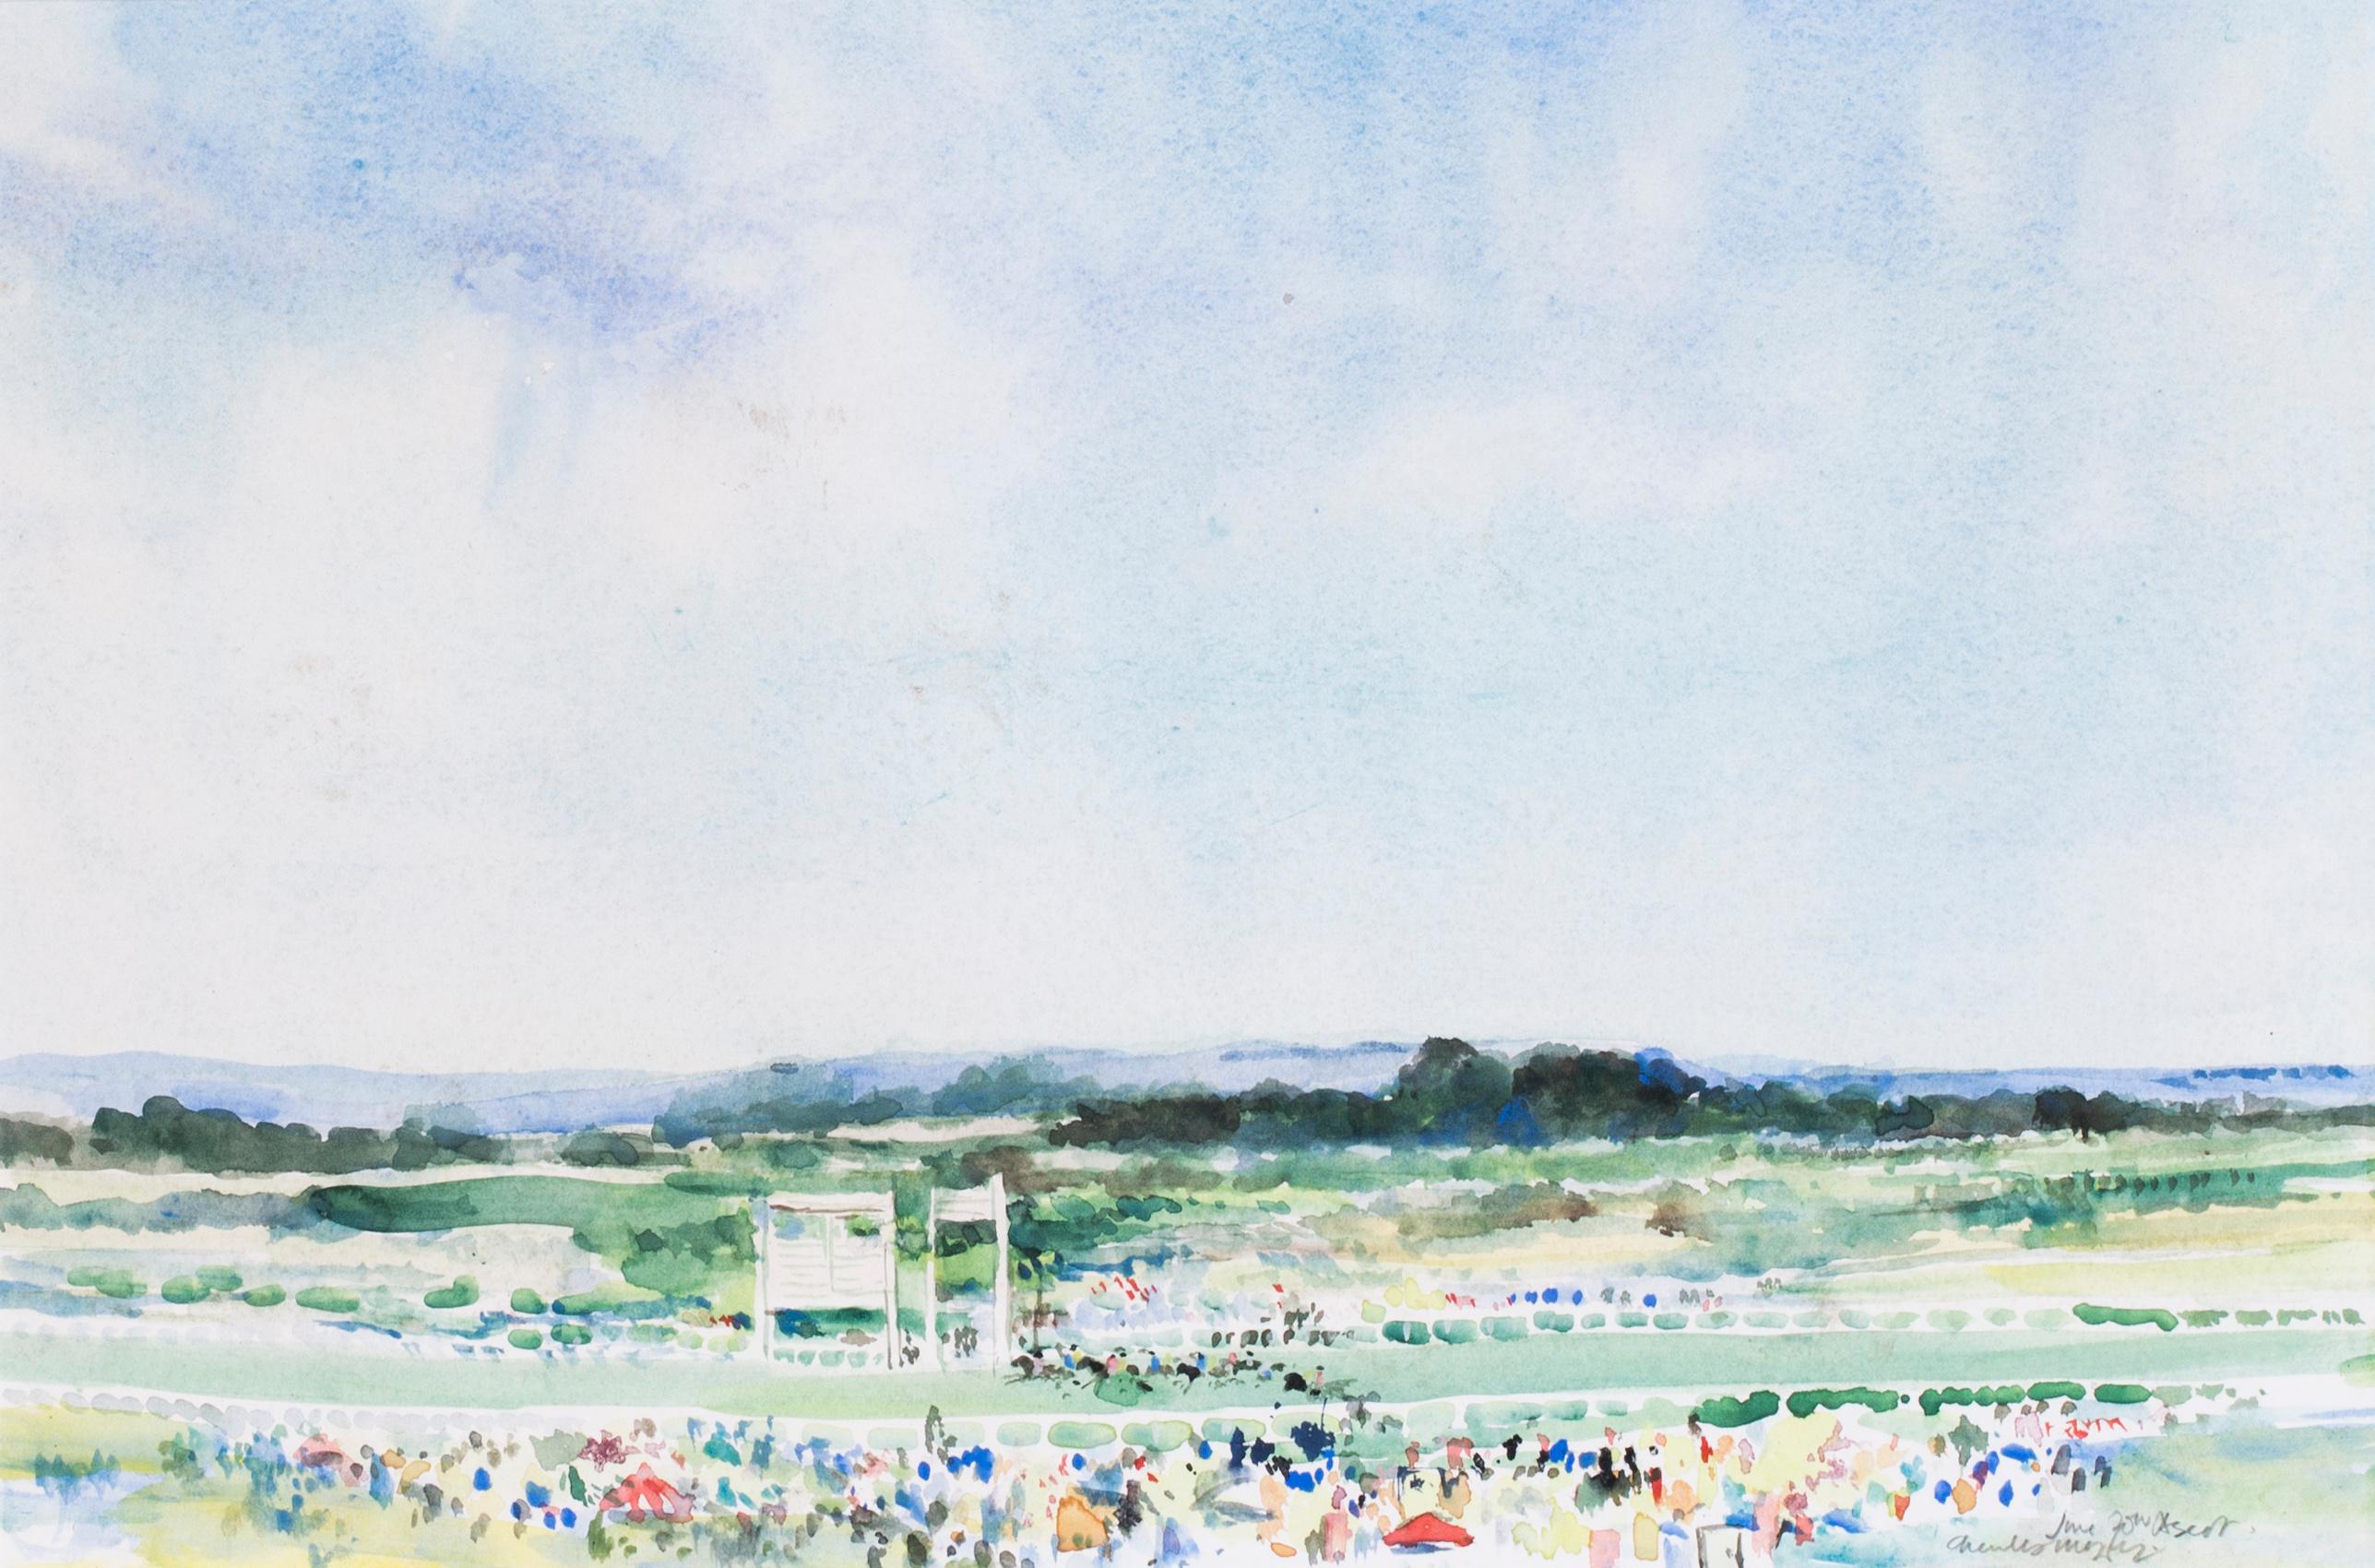 Ascot Racecourse, British 20th Century watercolour by Charles Mozley - Art by Charles Mozley 